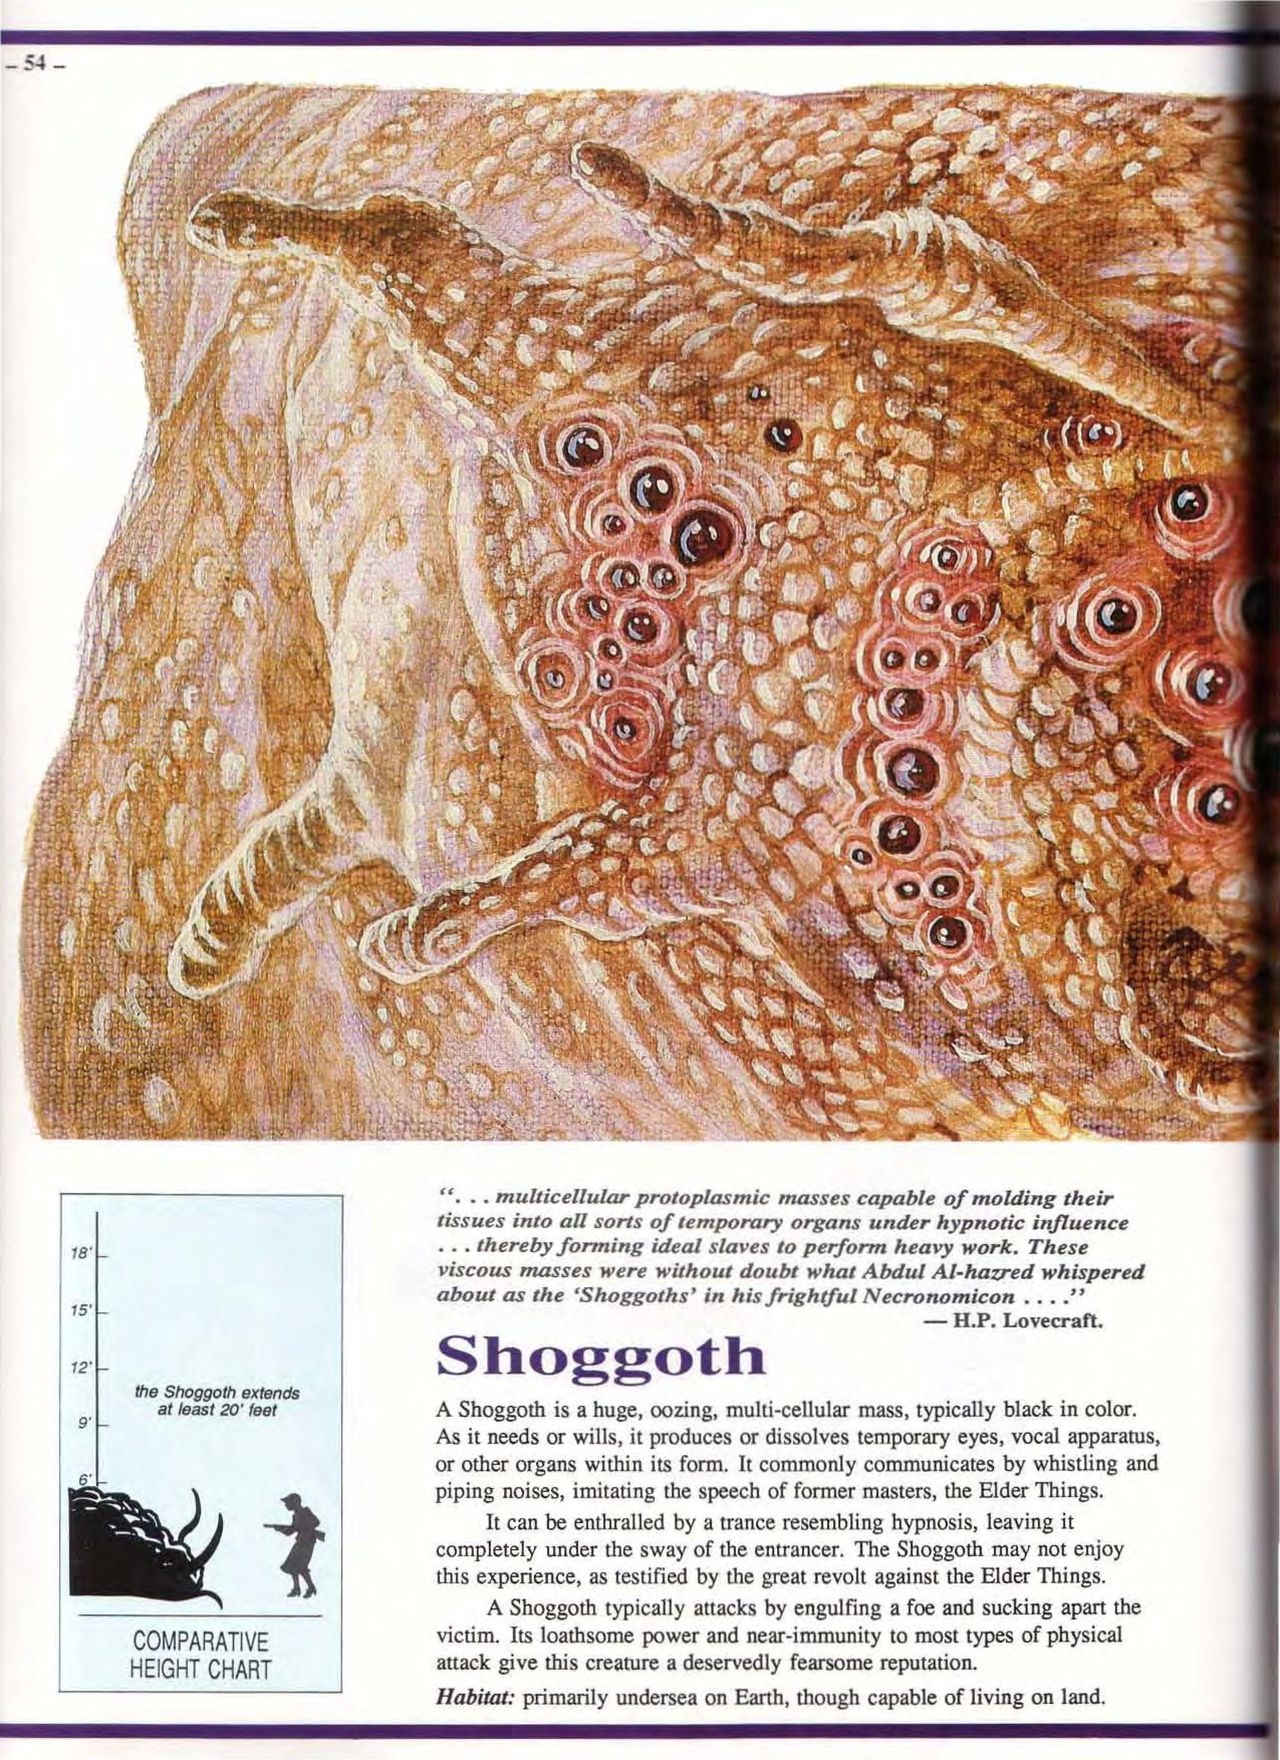 S. Petersen's Field Guide to Cthulhu Monsters 53